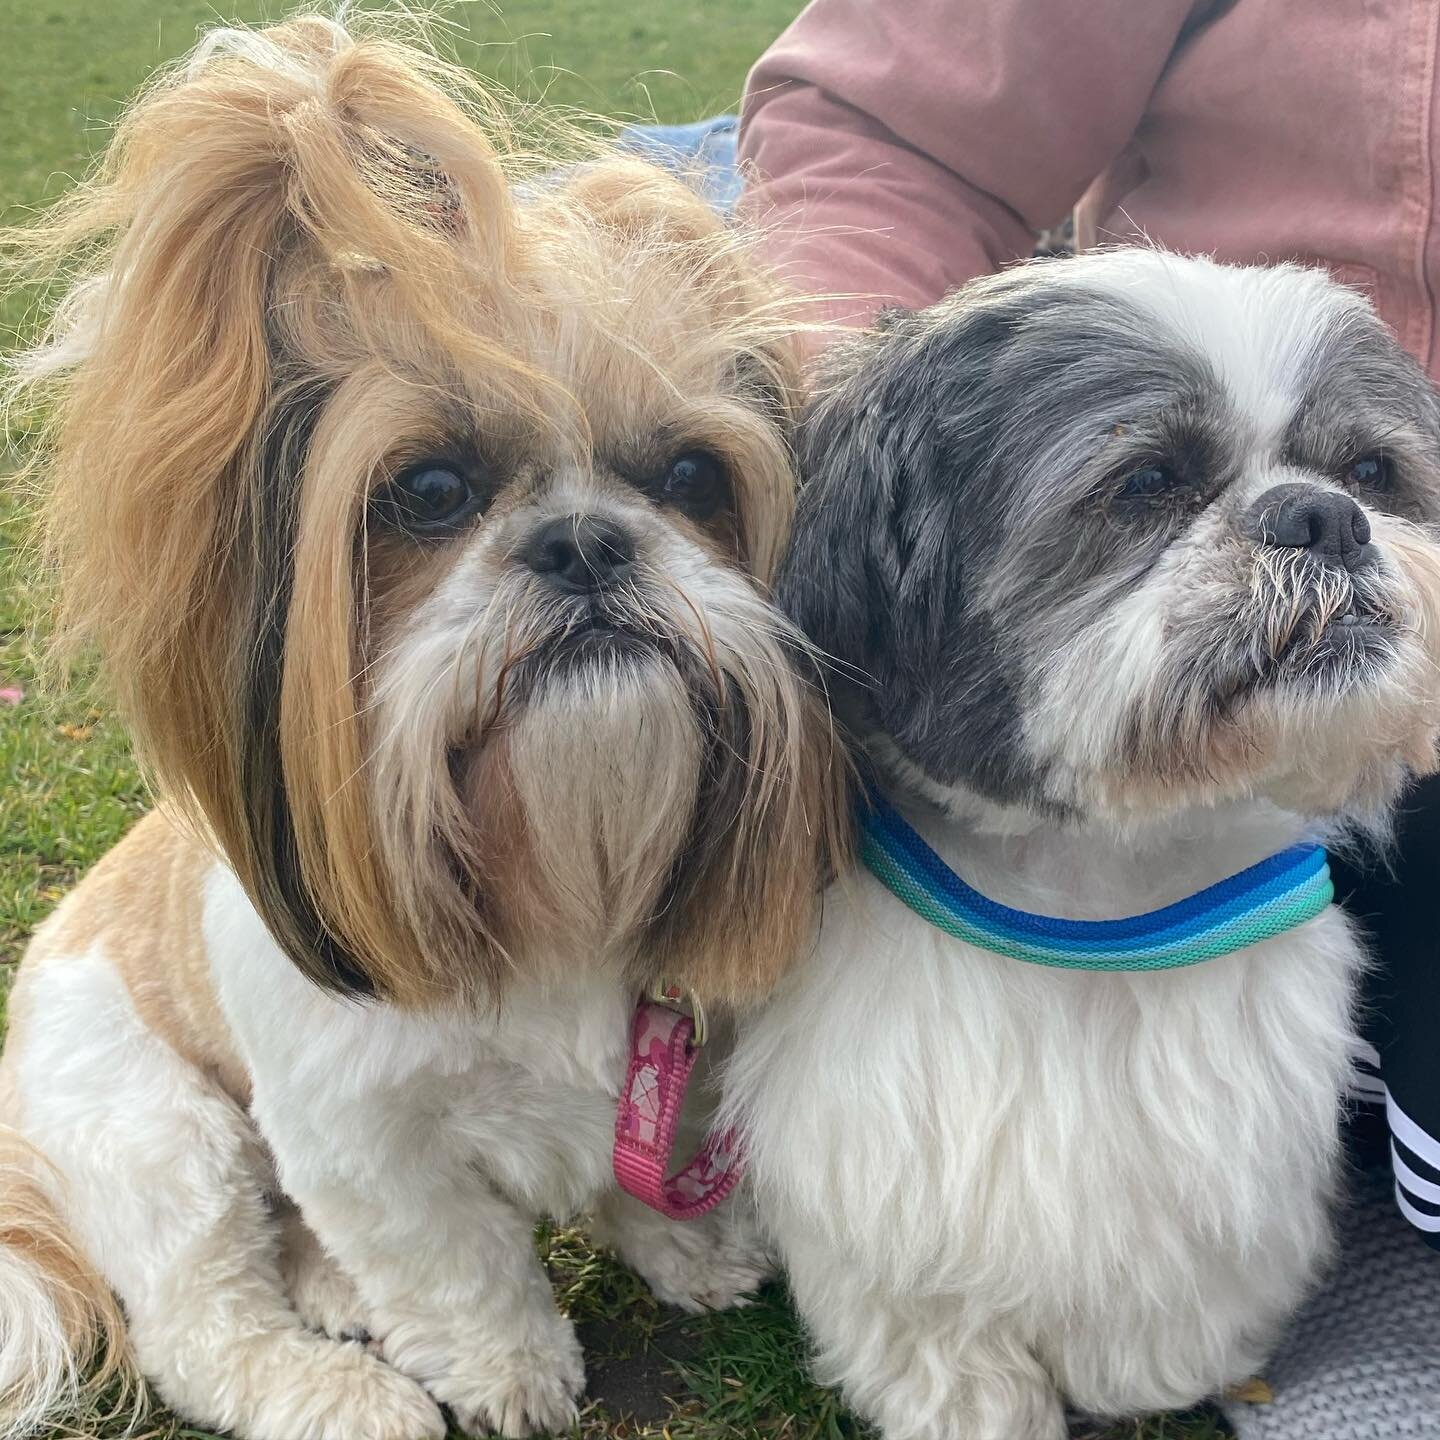 🌟Presenting a 

#nationalpetday meets

#nationalsiblingday combo 

for your delectation 

💙💗🐶🐶💙💗

@thehouseoftzu 

#shihtzu #shihtzusofinstagram #shihtzus #shihtzulovers #dogs #dogsofinstagram